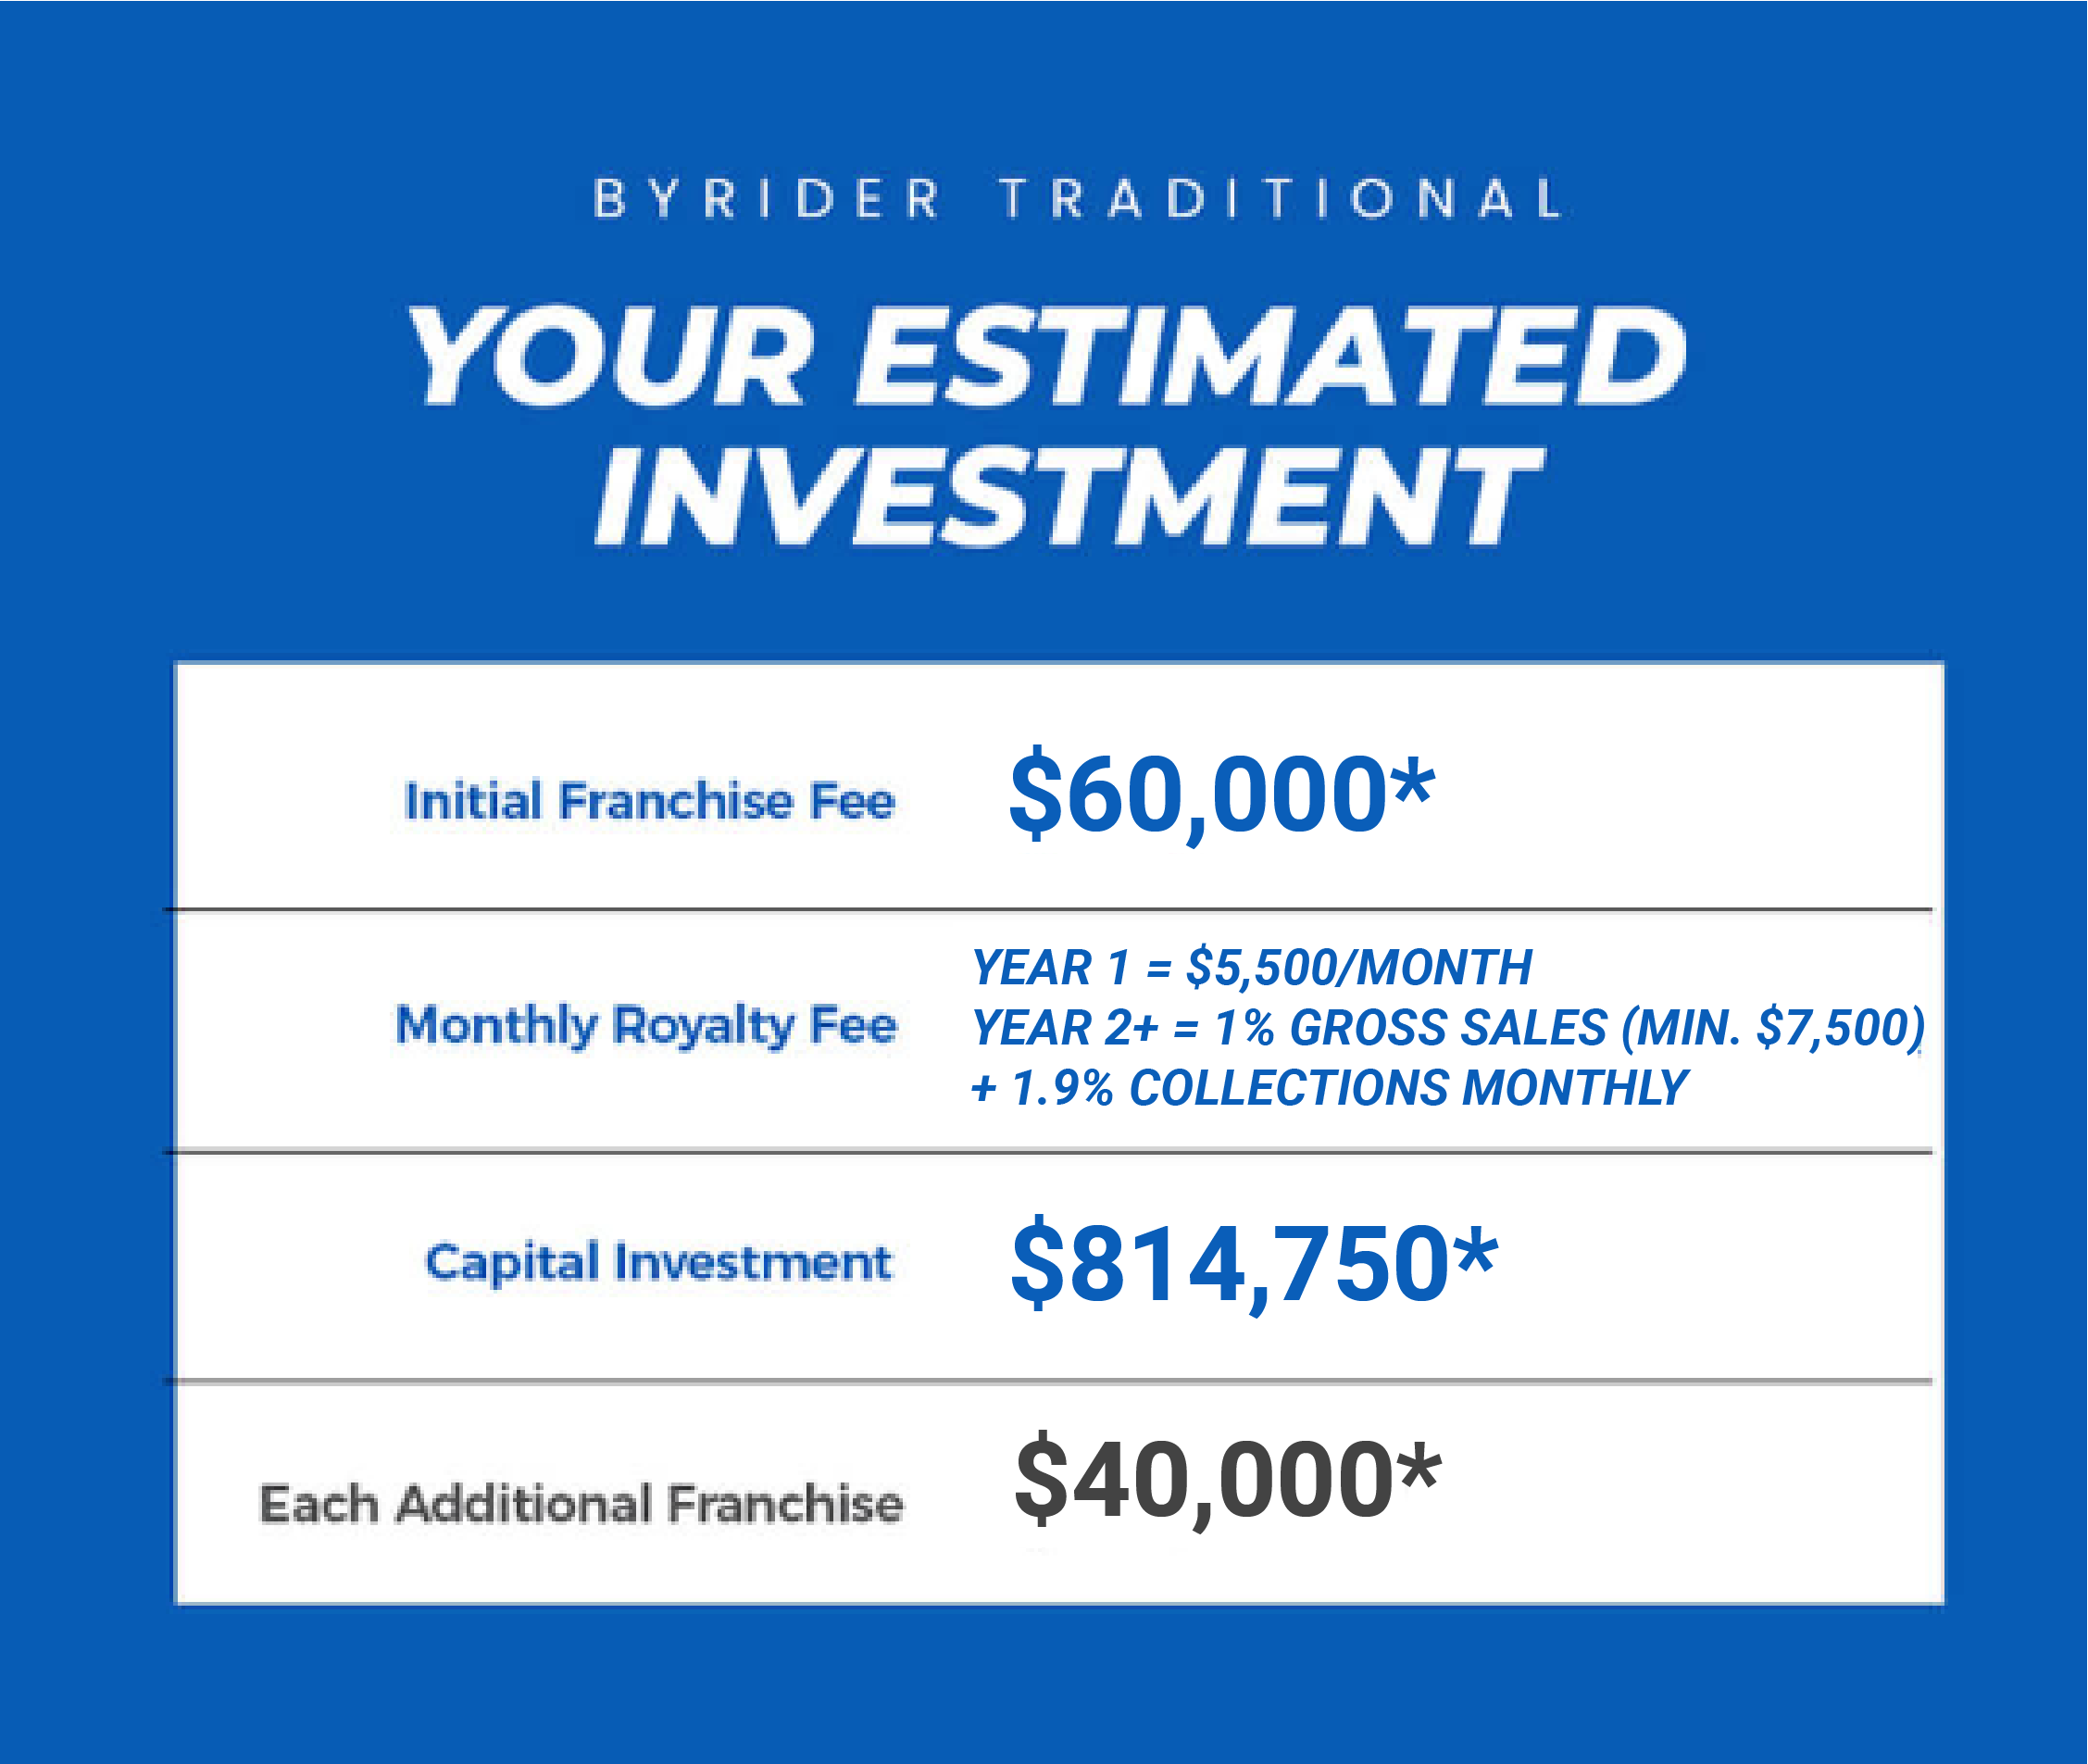 investment - byrider traditional